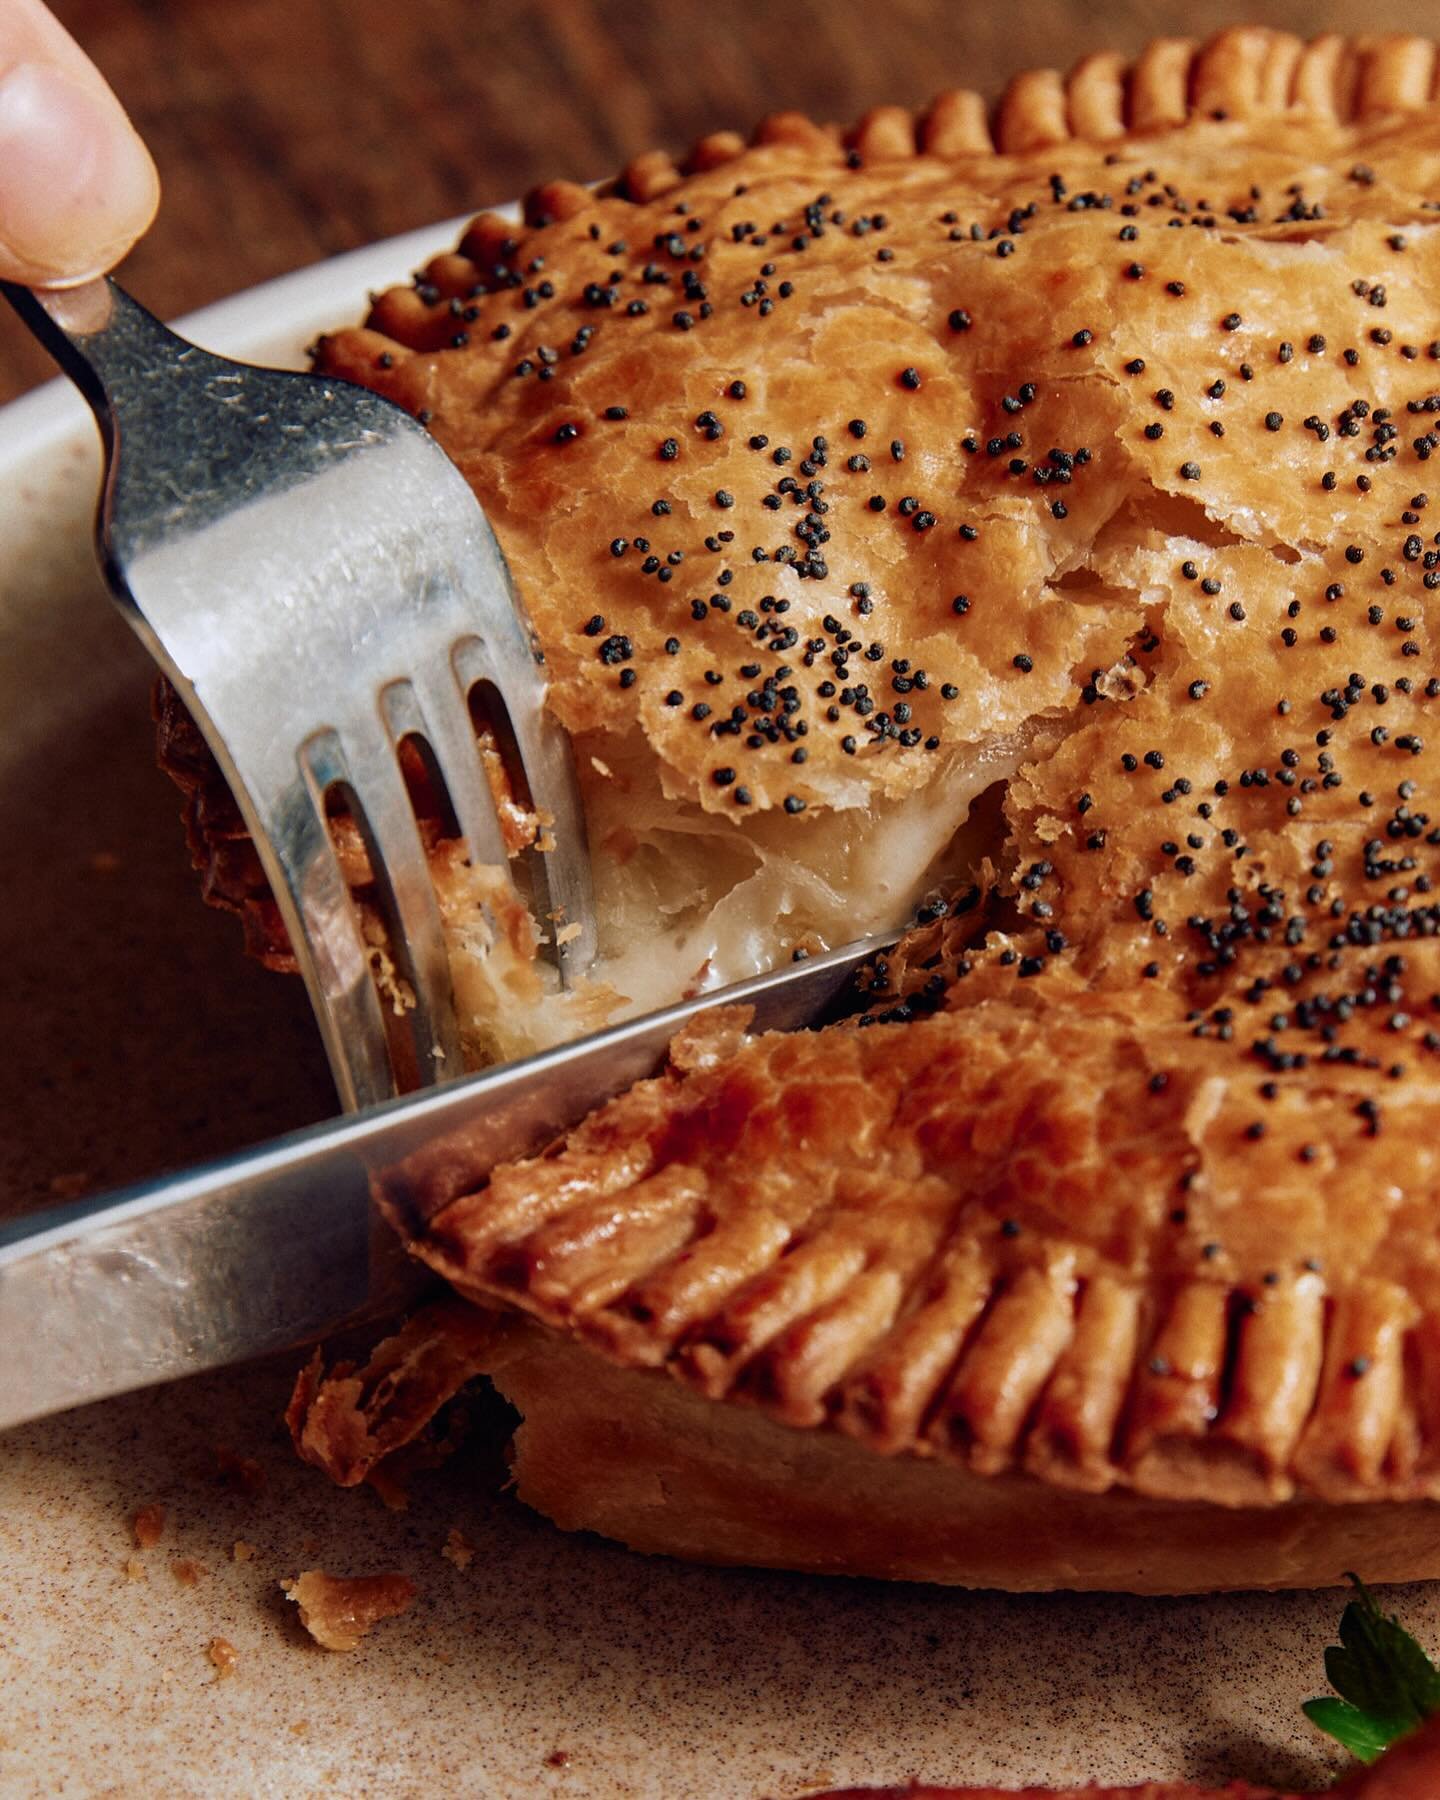 $16 pies in the bar, weekday lunch sorted! Bring your mates and have a Tassie beer with it! Available this week only for Pint of Origin: Tasmania.

#thelincolncarlton #pintoforigintasmania @craftypint